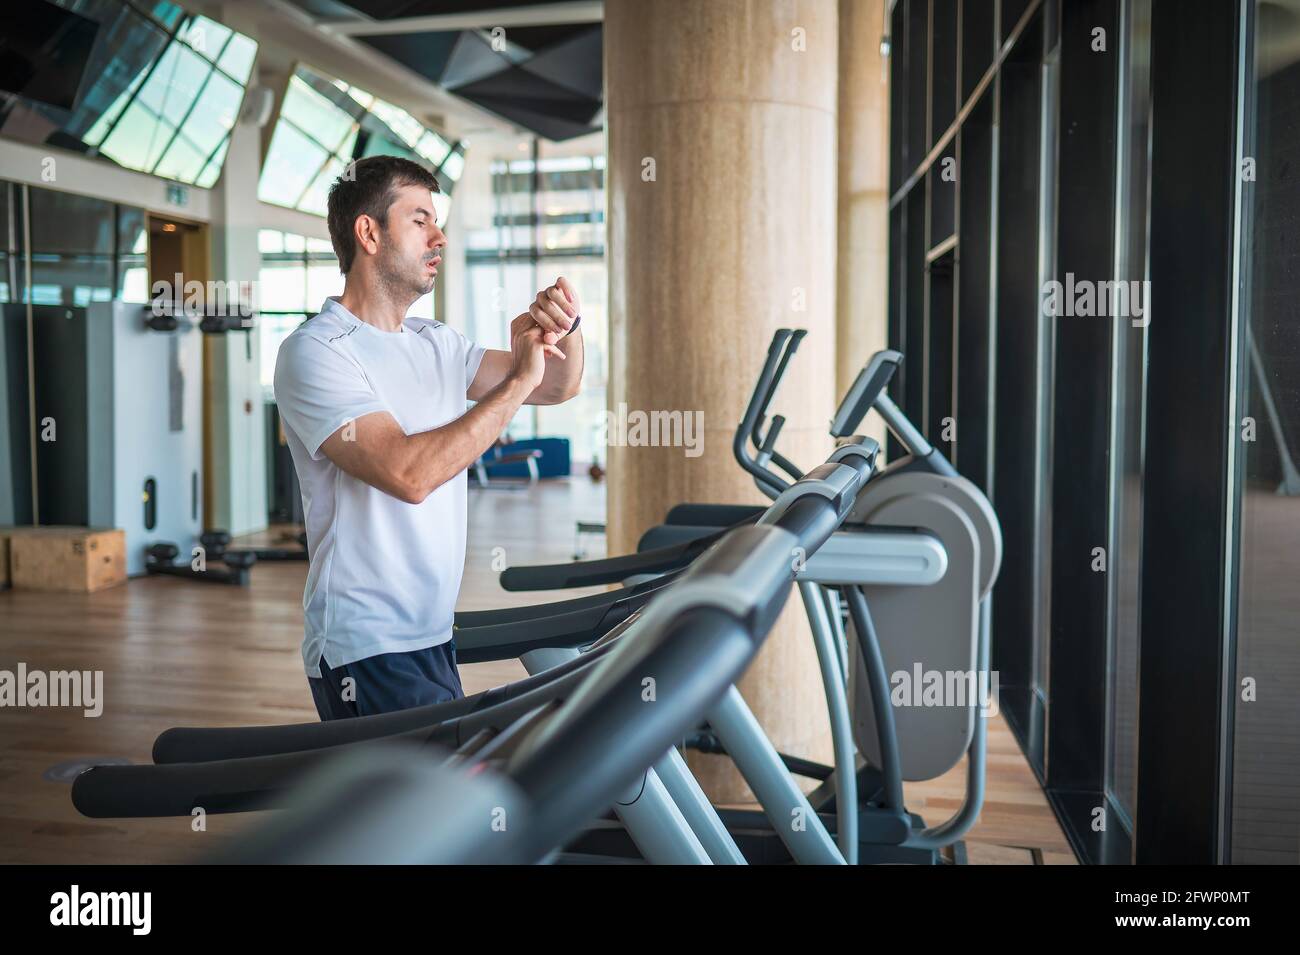 Man using smart watch fitness tracker device while jogging on a treadmill during a cardio running warmup exercise in the gym for staying fit and in sh Stock Photo